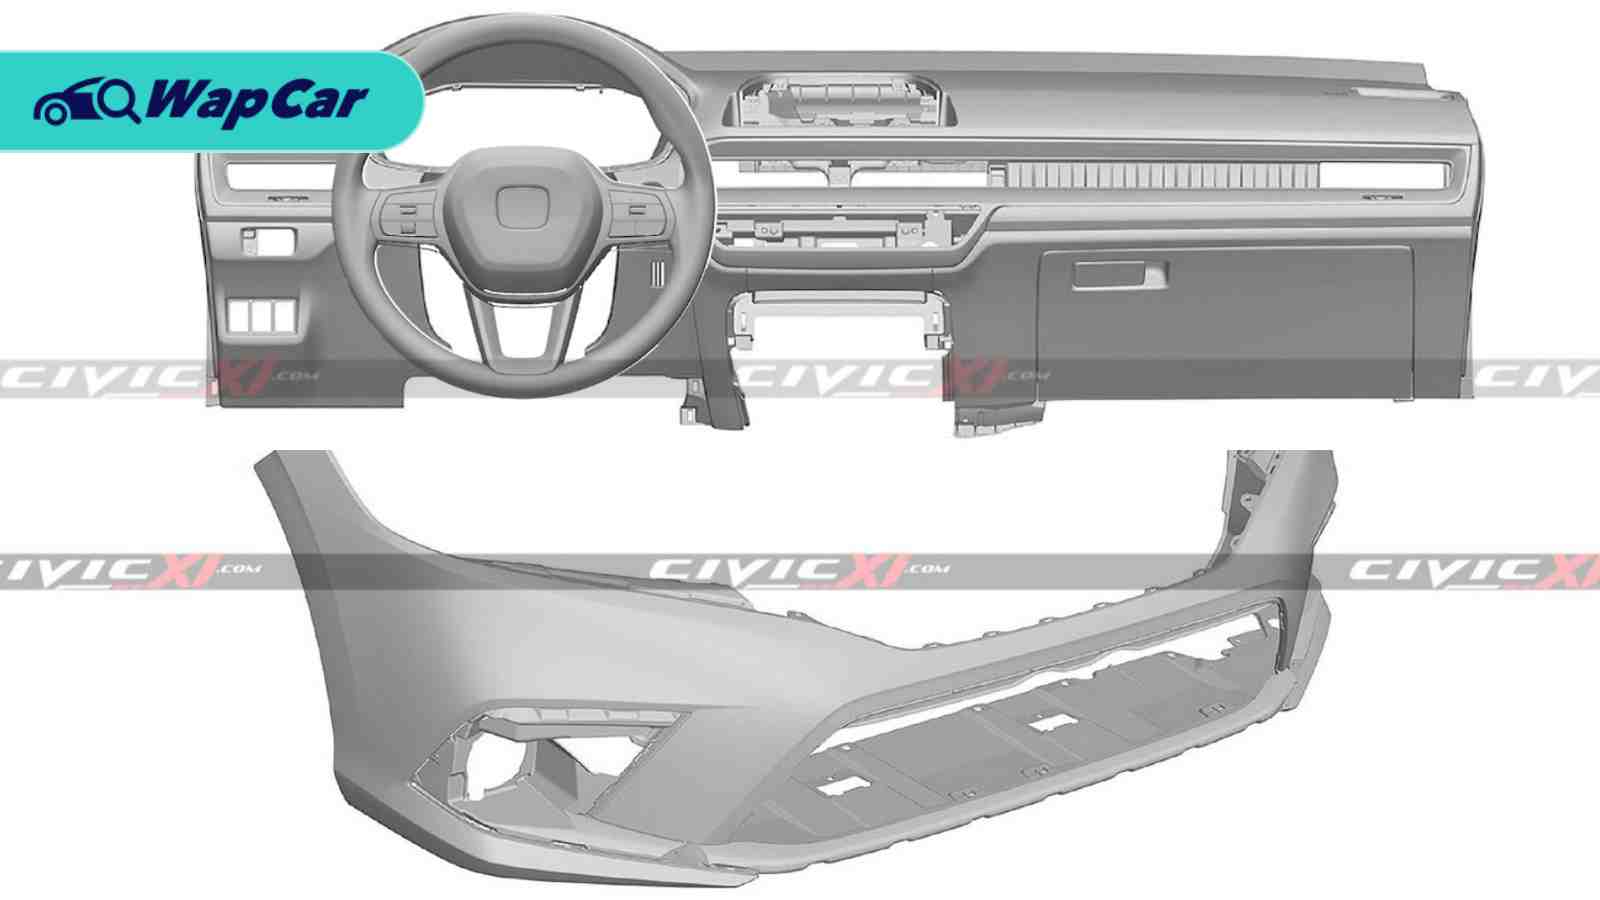 Leaked! This is how the interior of the 11th gen 2022 Honda Civic will look like 01